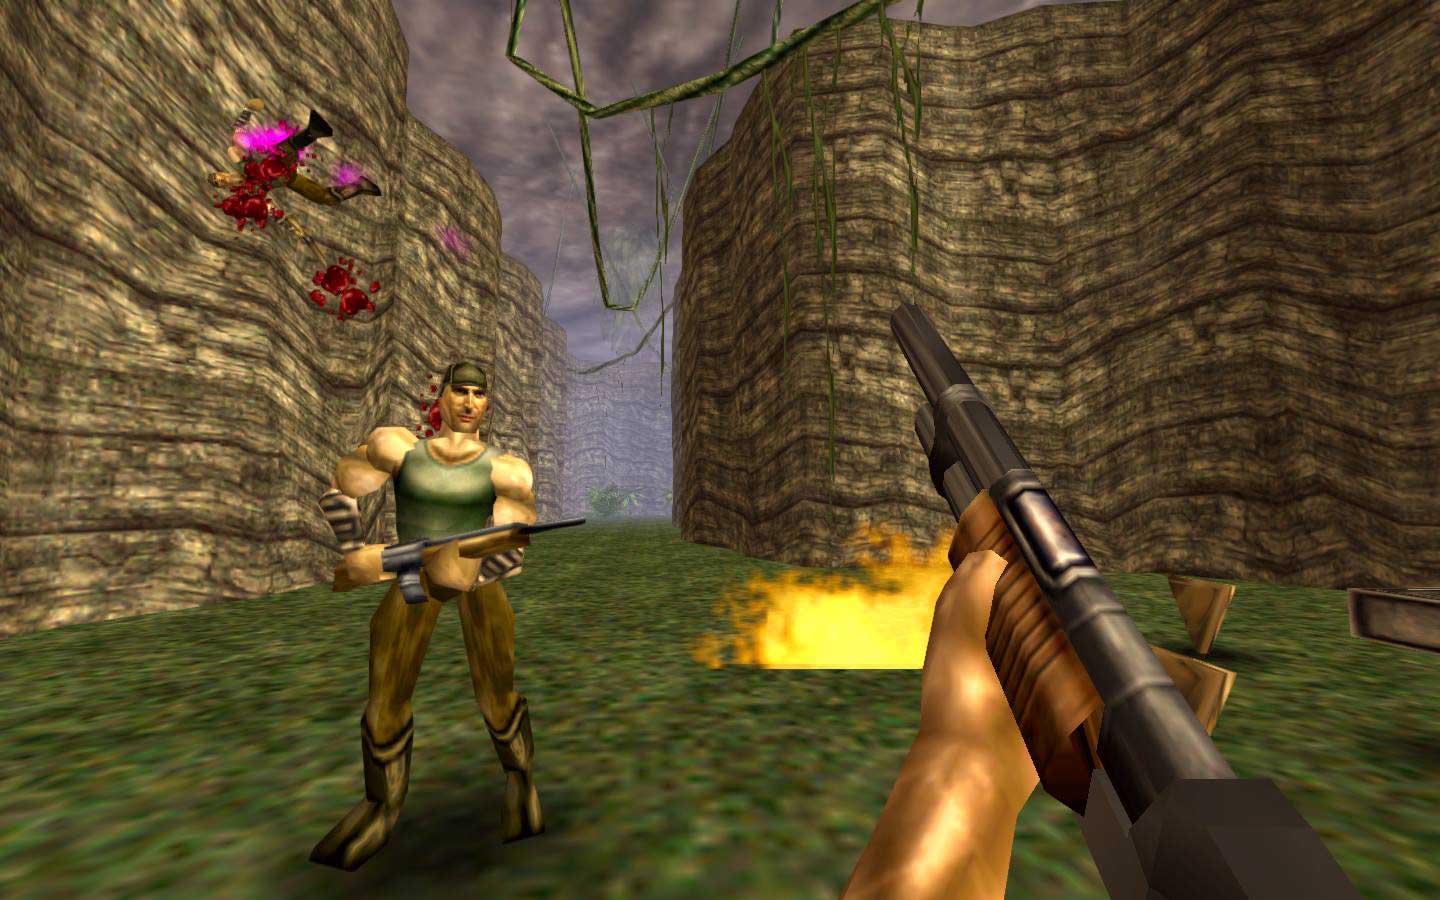 Image for Turok and Turok 2 remasters coming to Xbox One this week